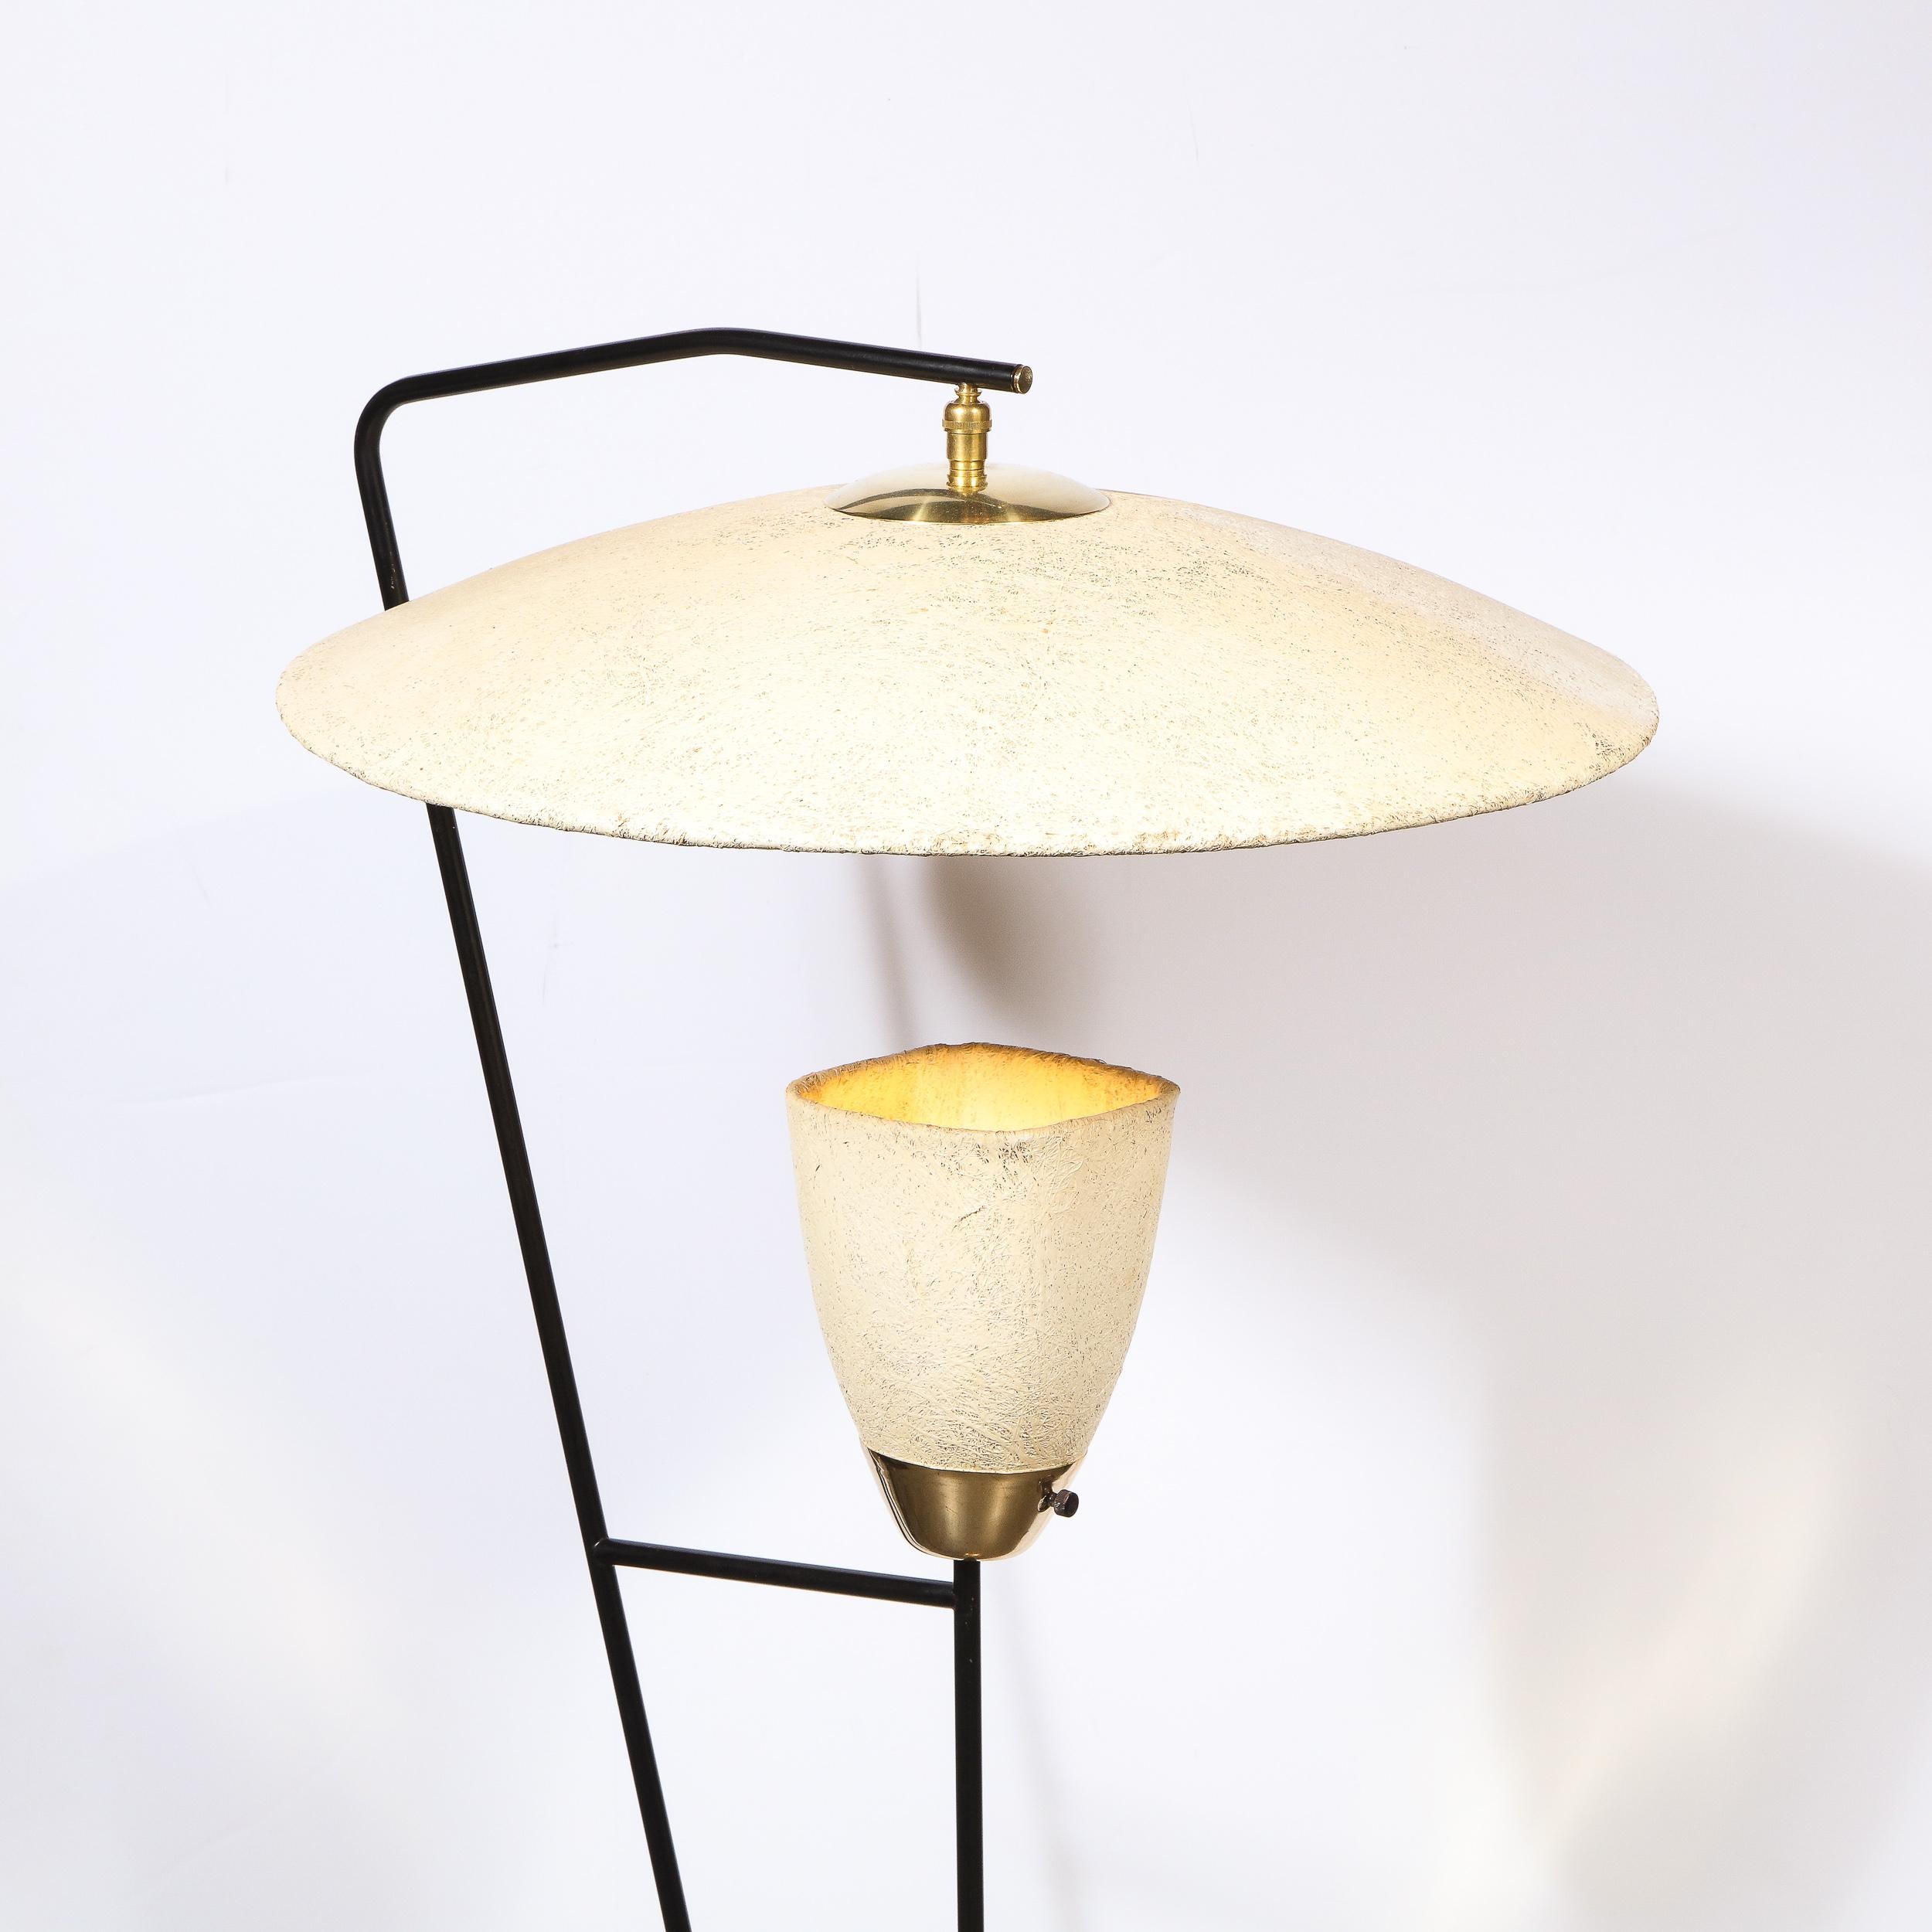 American Mid-Century Modern Brass and Black Enamel Floor Lamp with Formica Shades